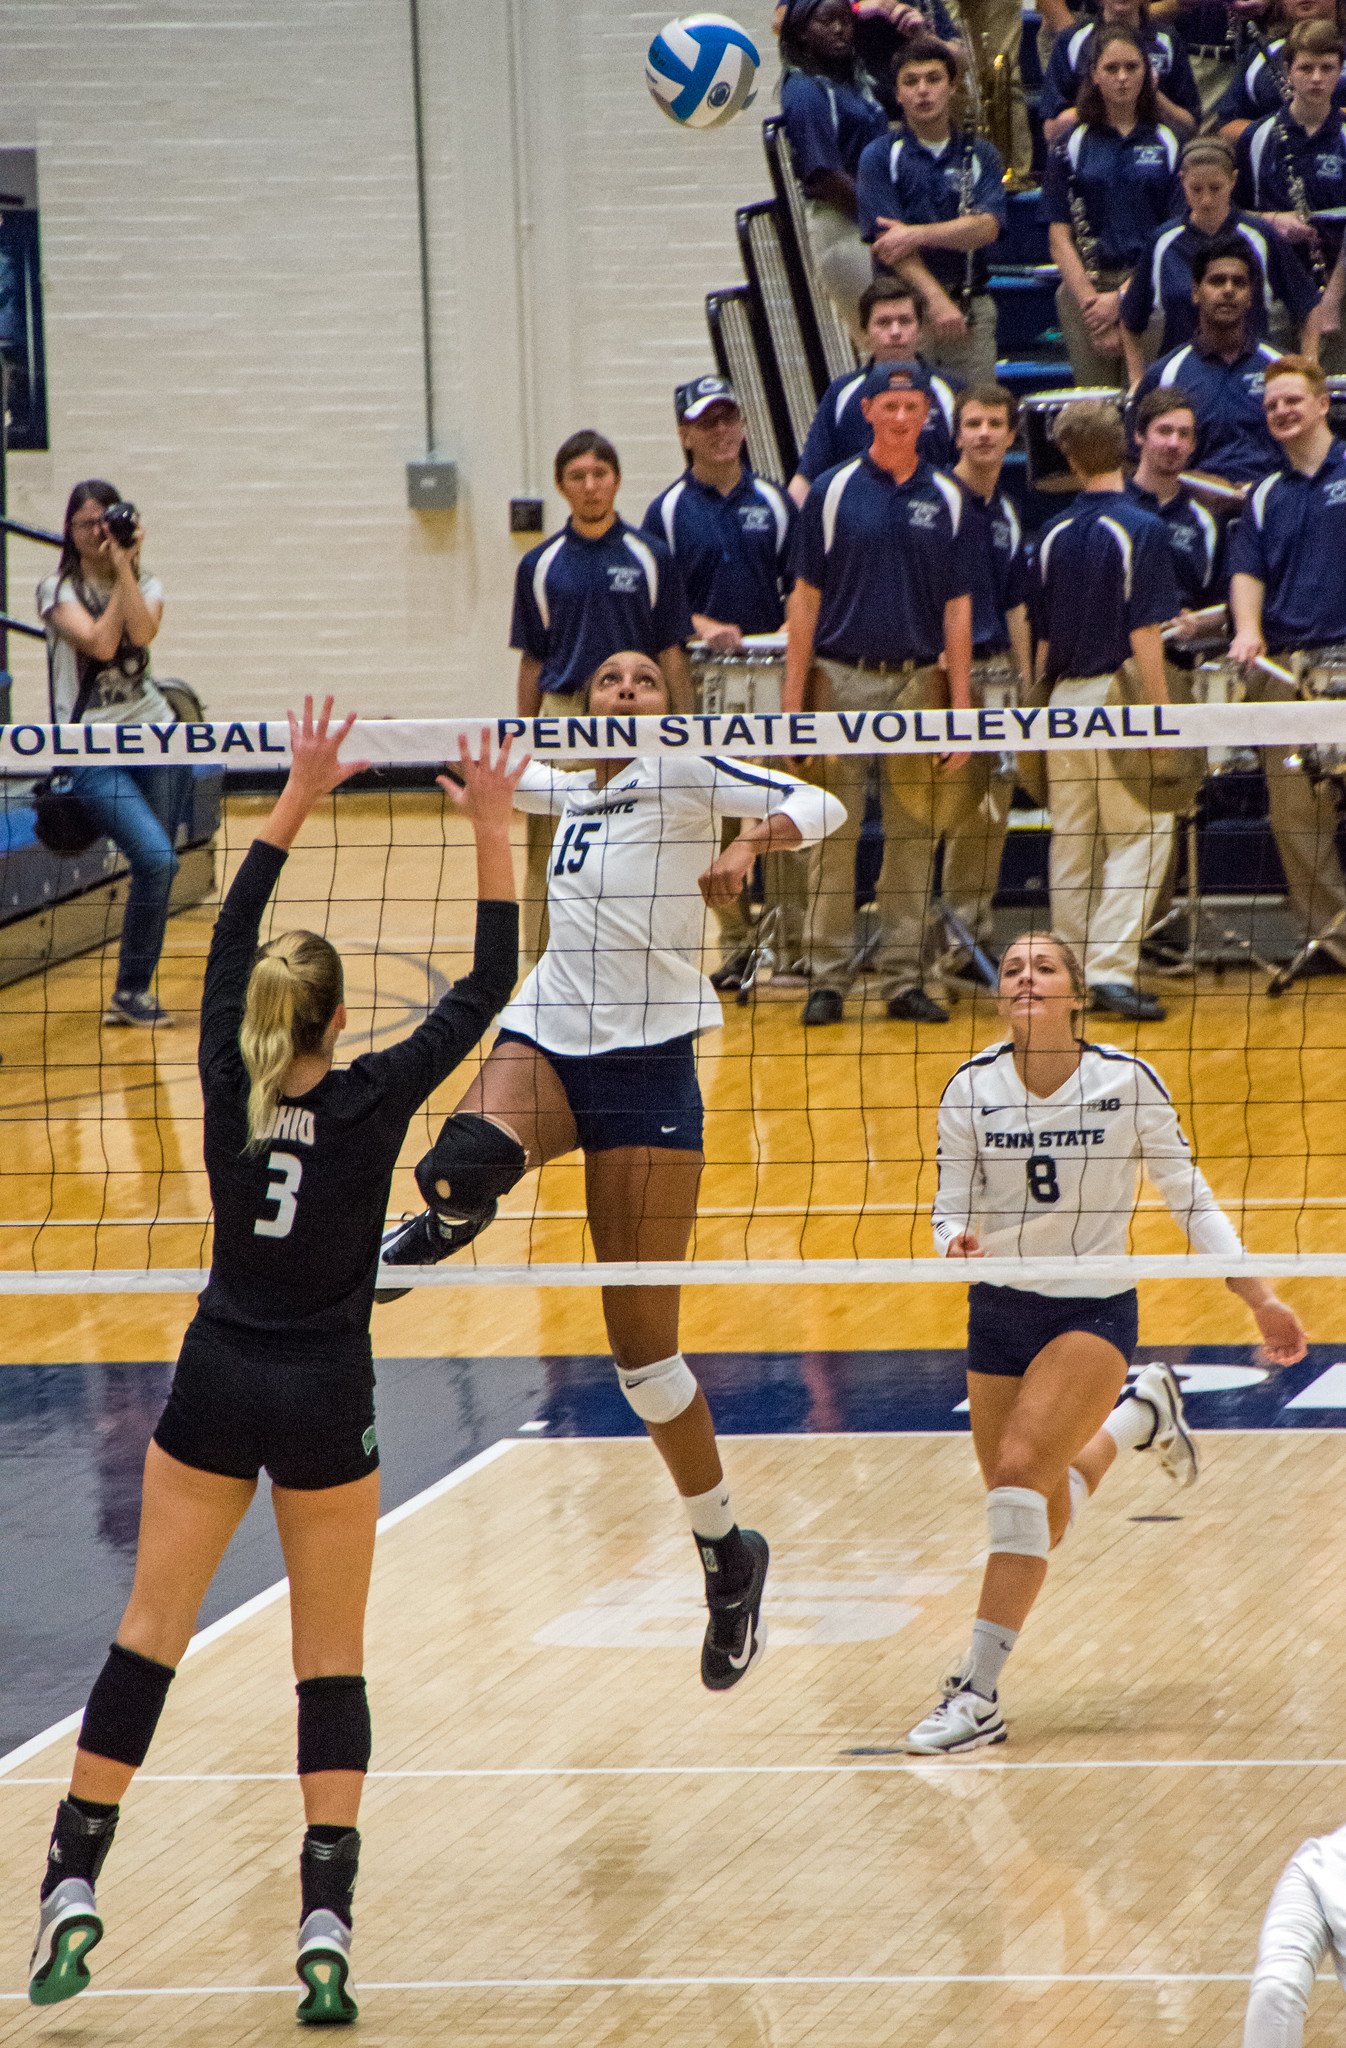 Volleyball Offense Strategies: The "slide" set is a flat high speed back set that falls just 4 - 5 feet away from the setter between Zone 3 and Zone 2 after peaking 1-3 feet above the top of the net.